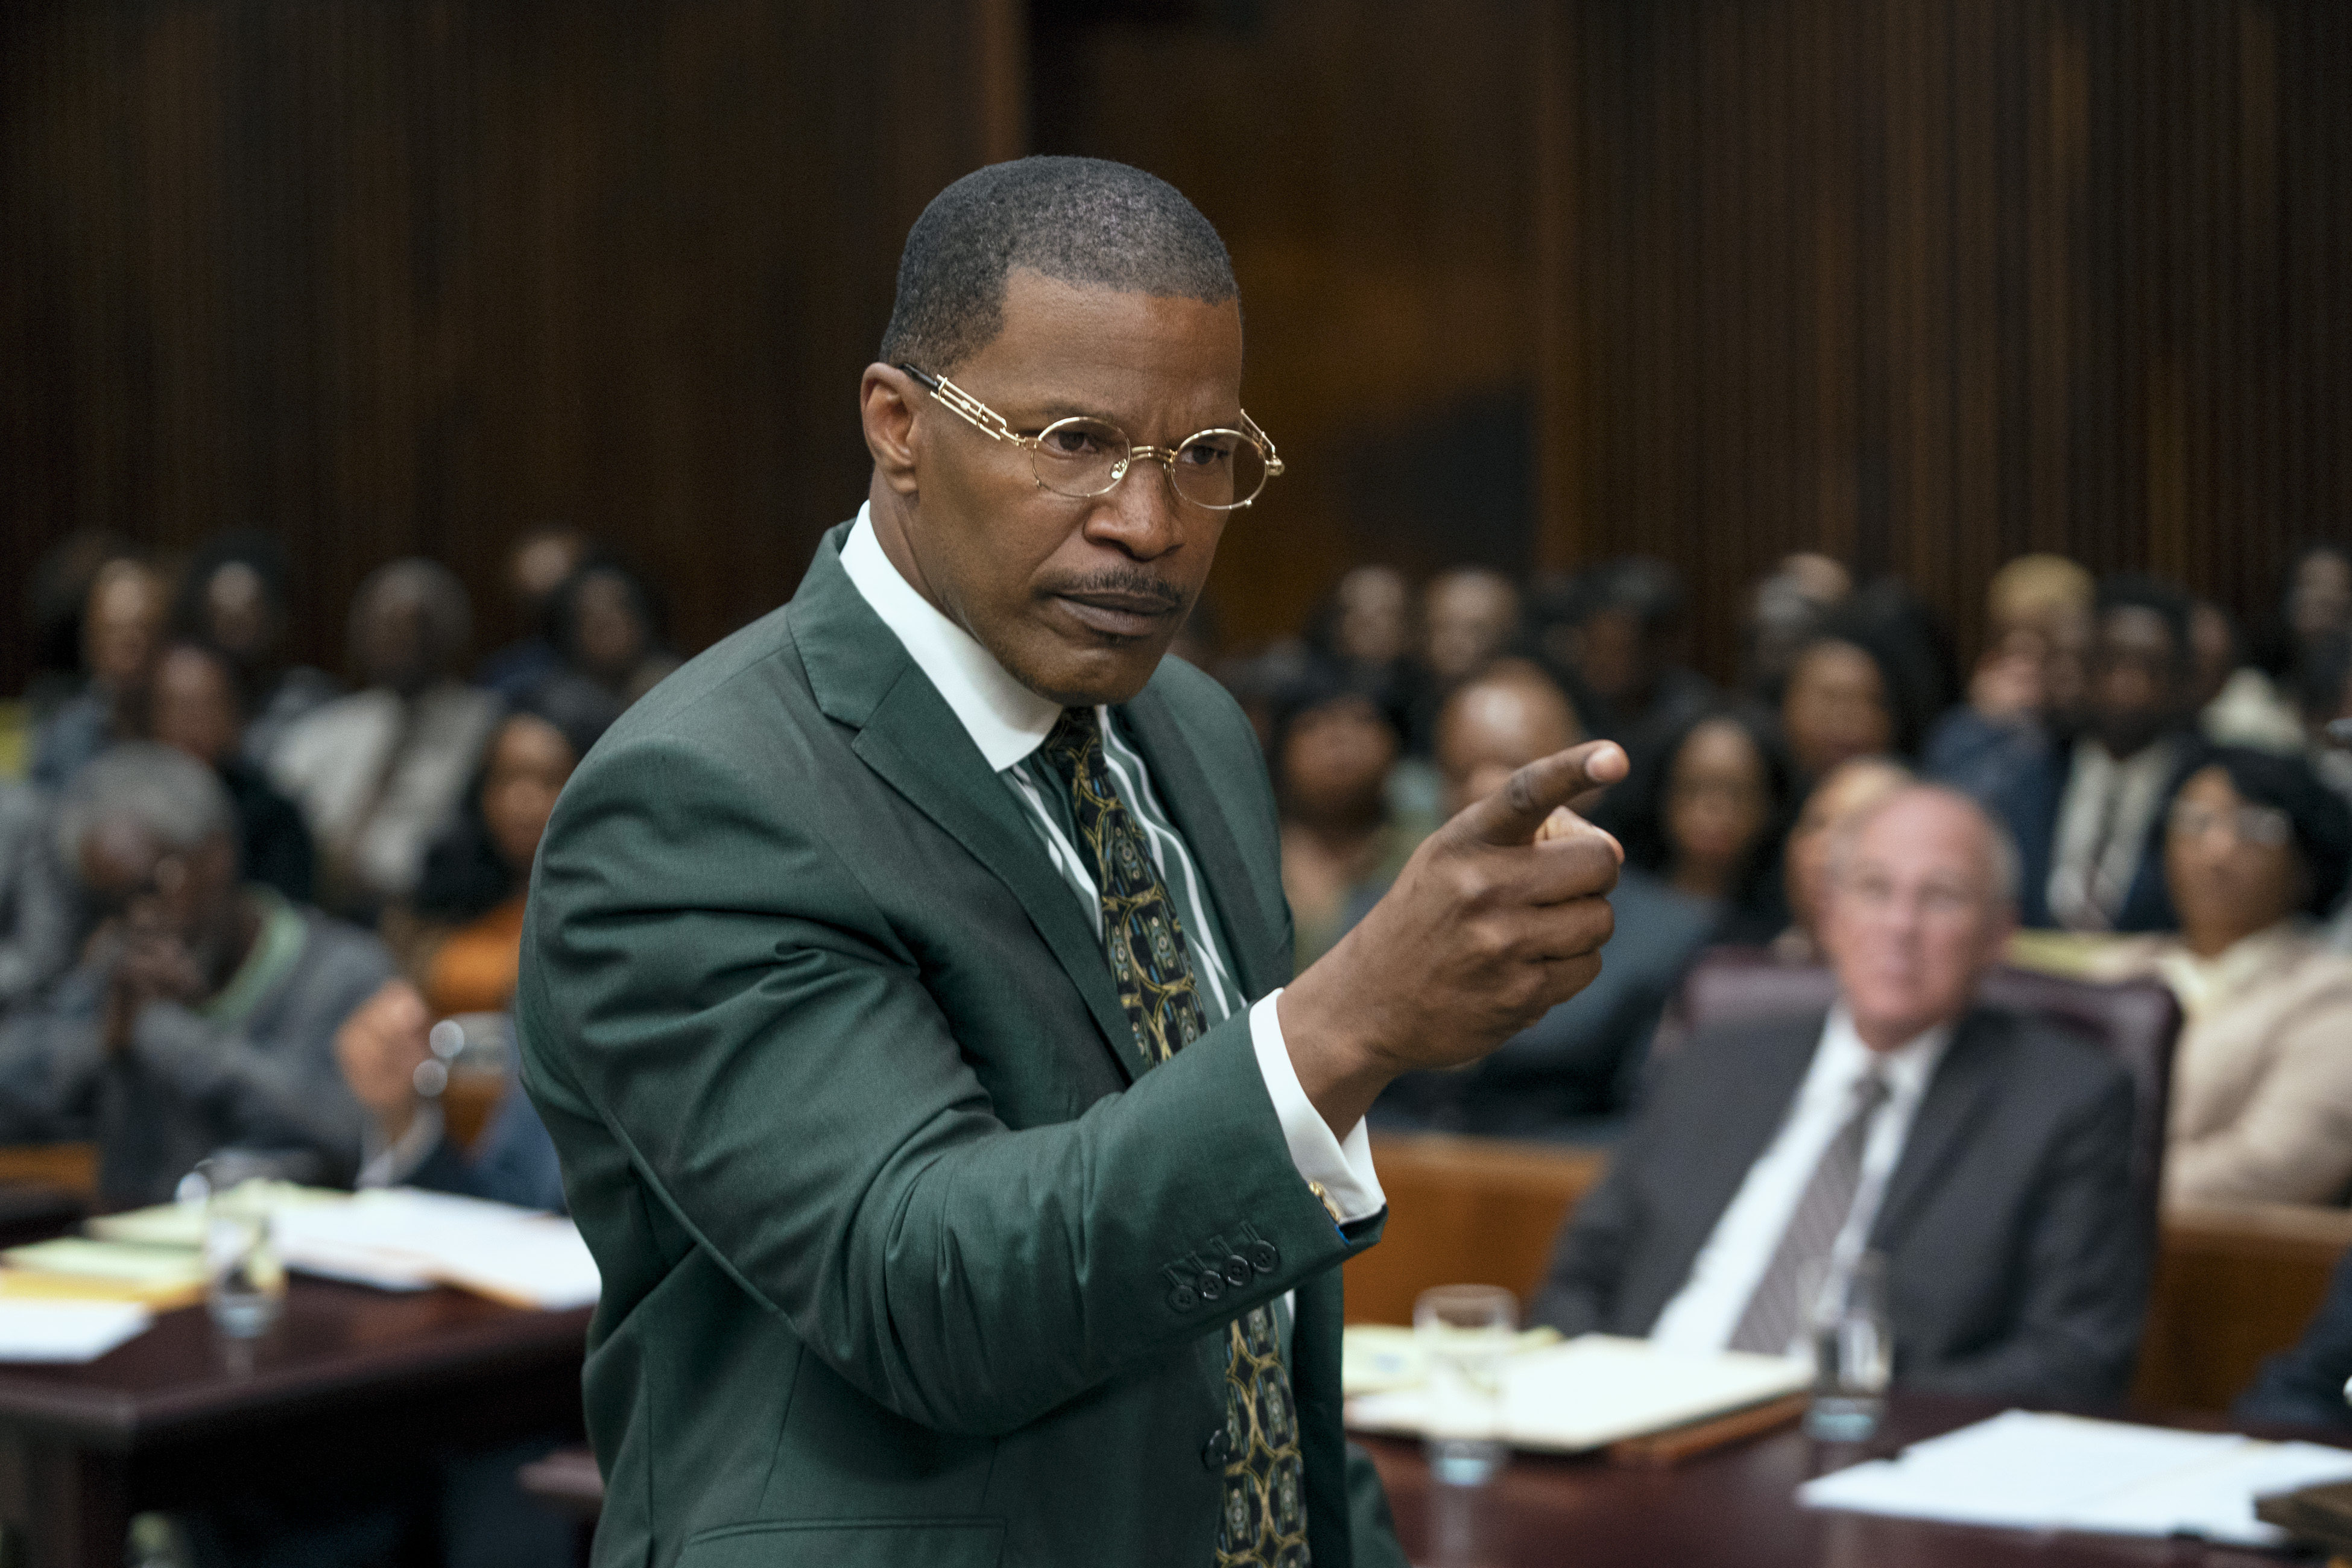 One Of One: Jamie Foxx Delivers Brilliant Performance In Rousing Courtroom Drama ‘The Burial,’ Makes Strong Case For Second Oscar